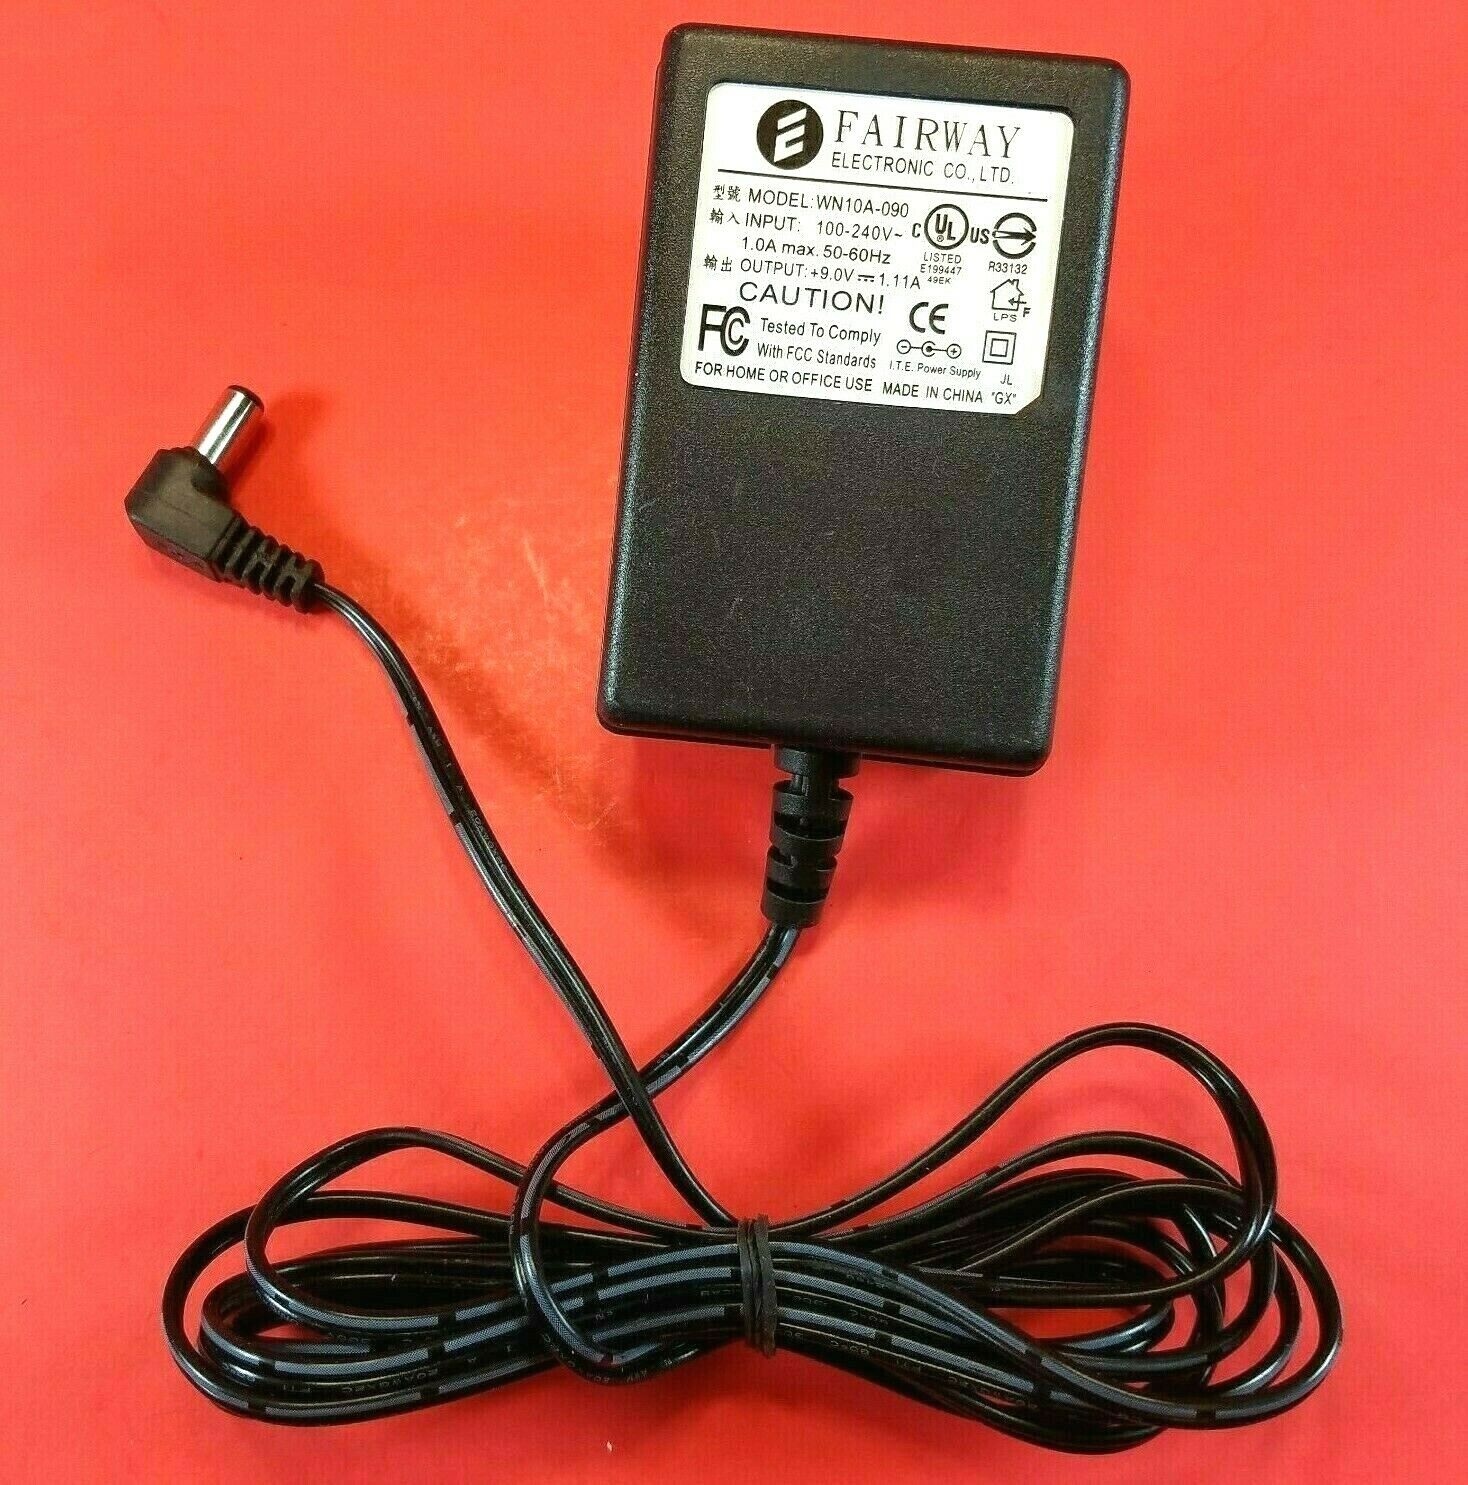 Genuine FAIRWAY Model WN10A-090 Power Supply Adaptor 9V 1.11A OEM AC/DC Adapter Type: AC Adapter Output Voltage: 9 V F